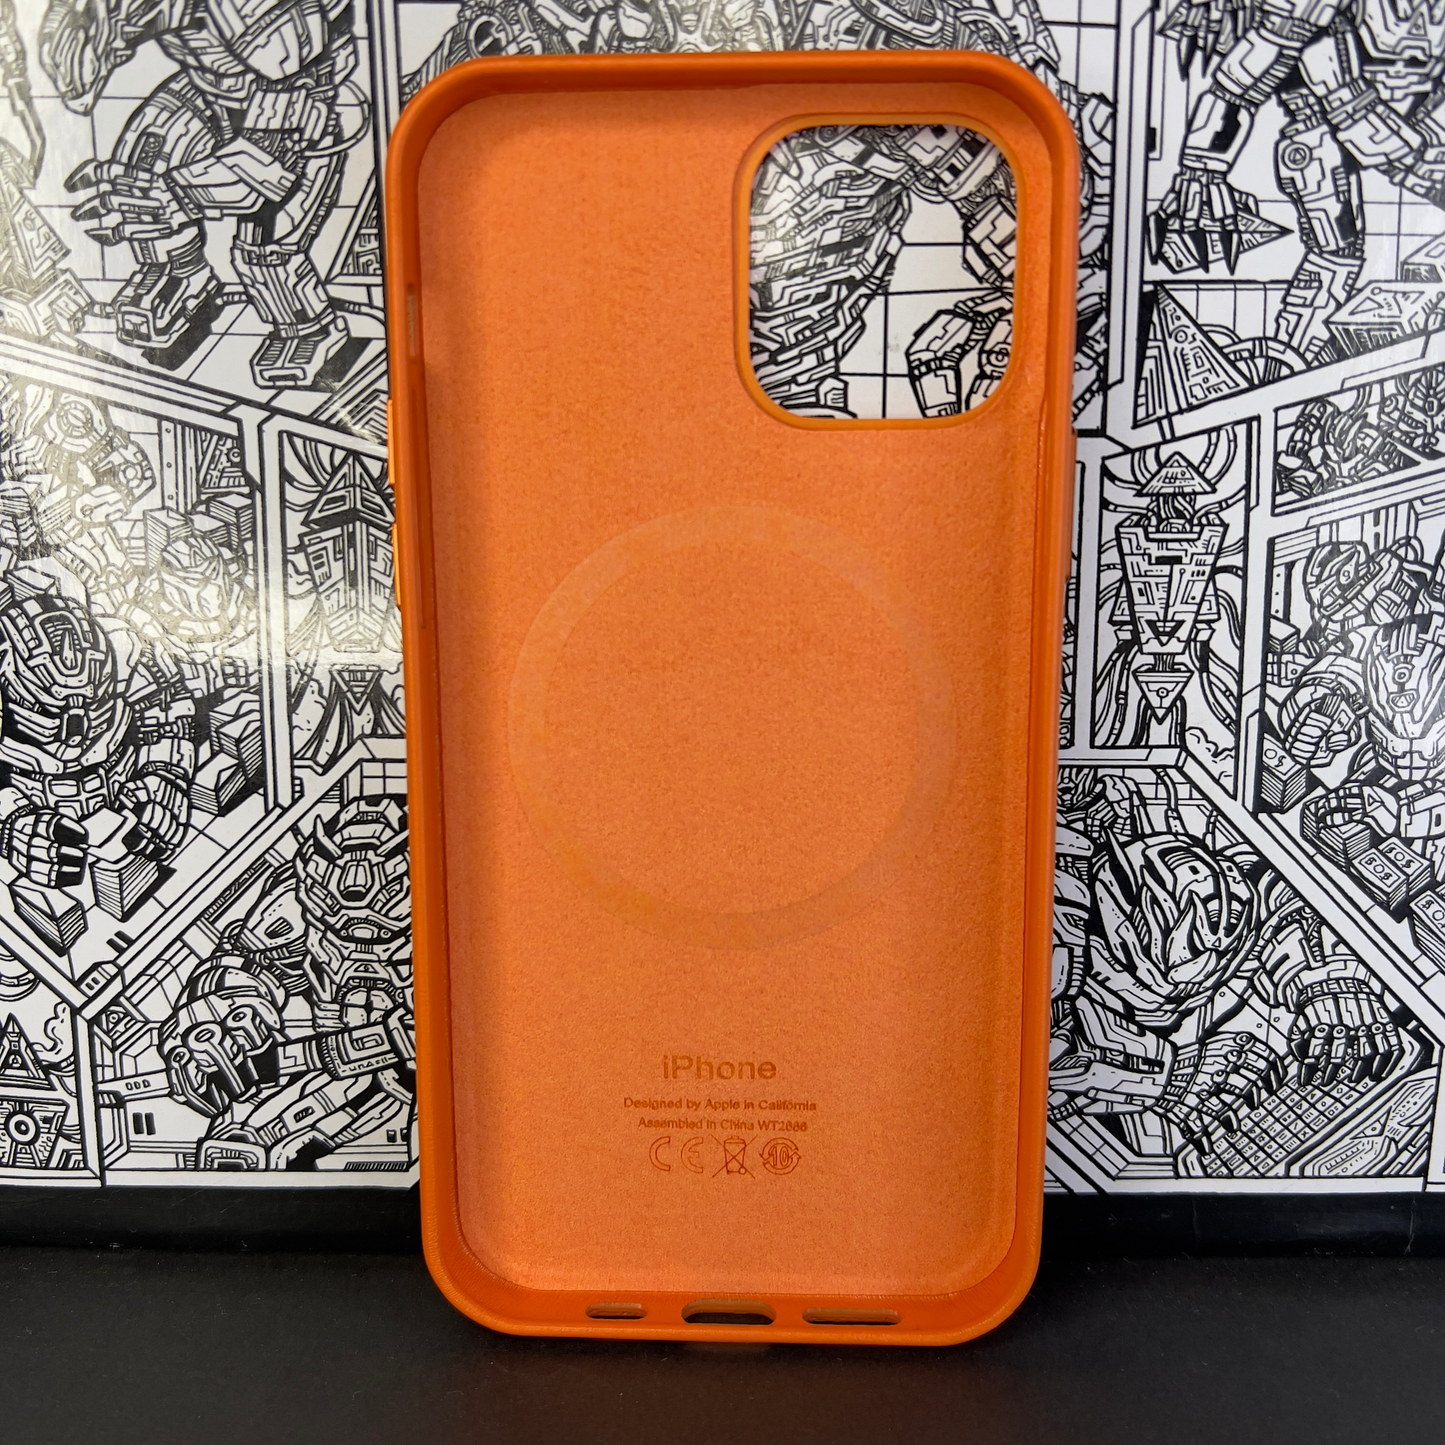 MagSafe Leather Case | iPhone 12 Normal | iPhone 12 Pro | Coral